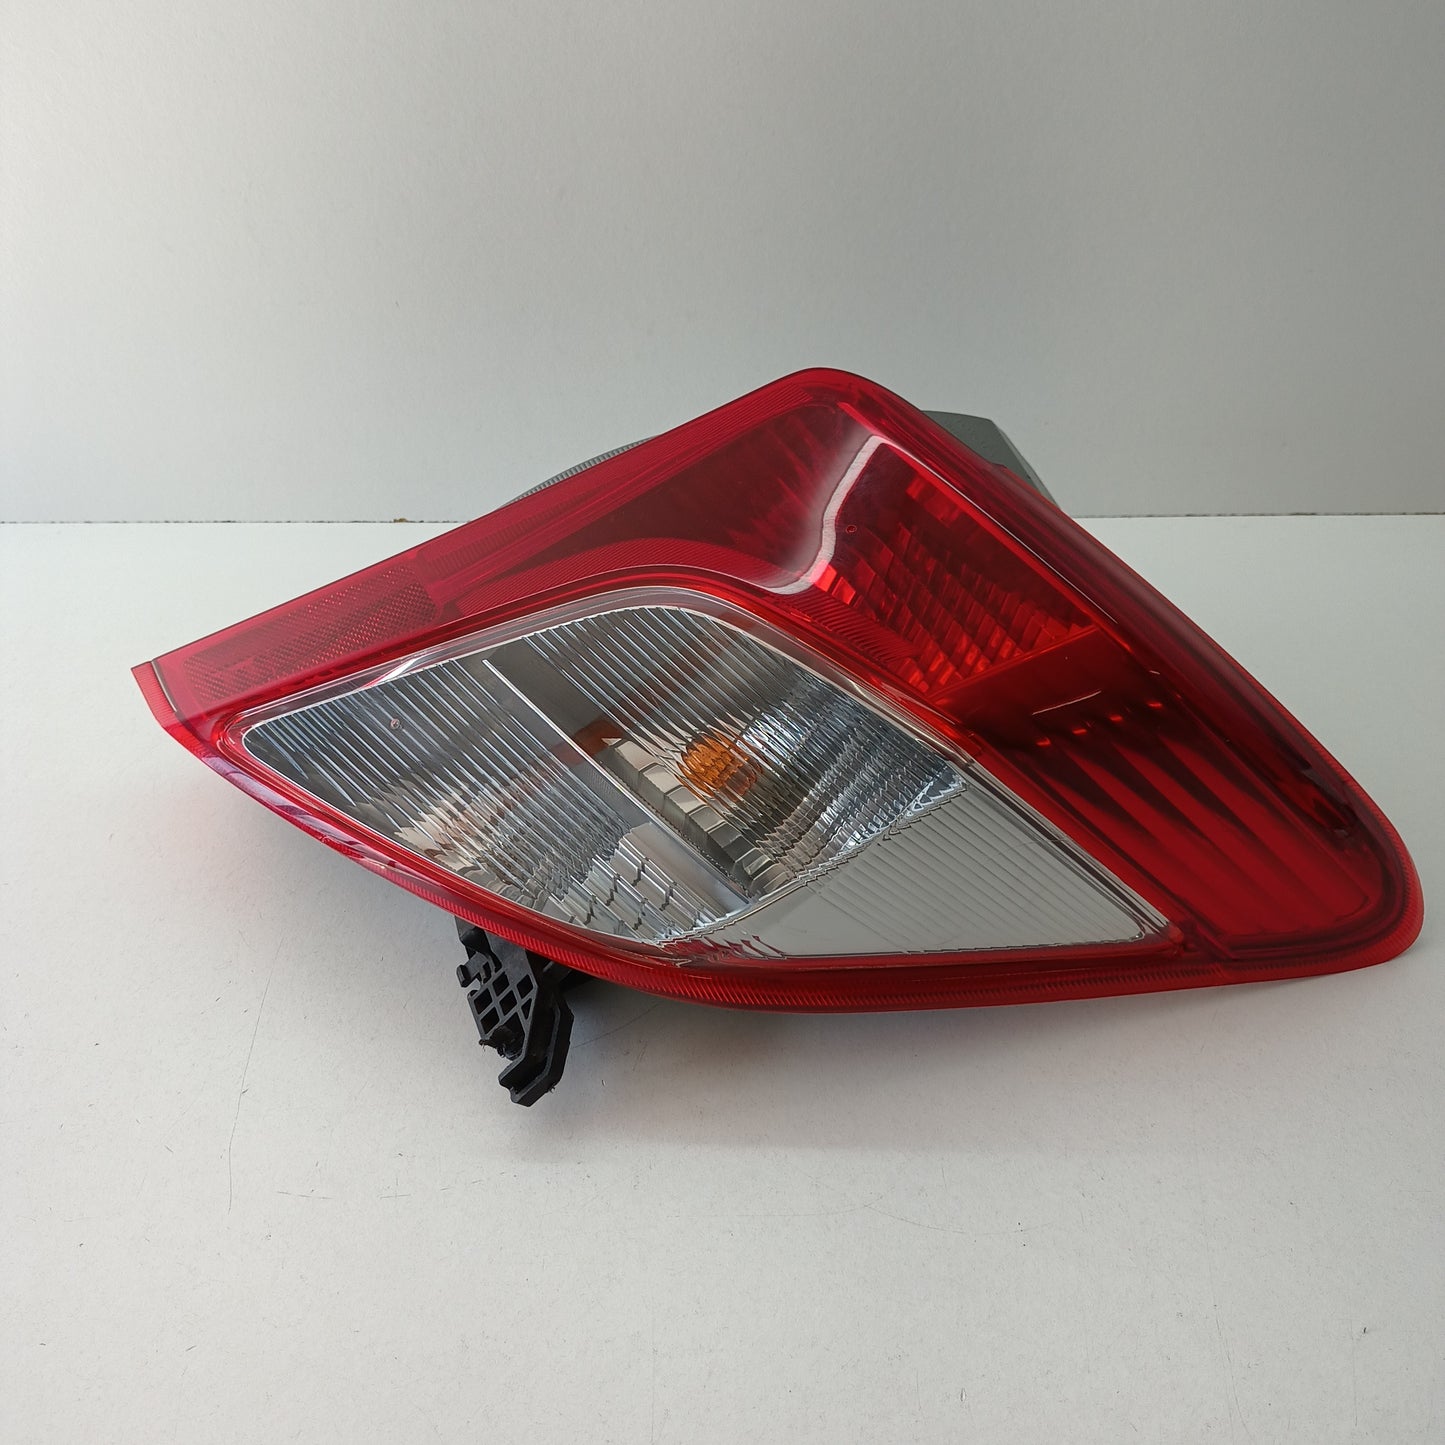 Toyota Yaris Hatchback Tail Light Right Hand Side NCP13# 2011 2012 2013 2014